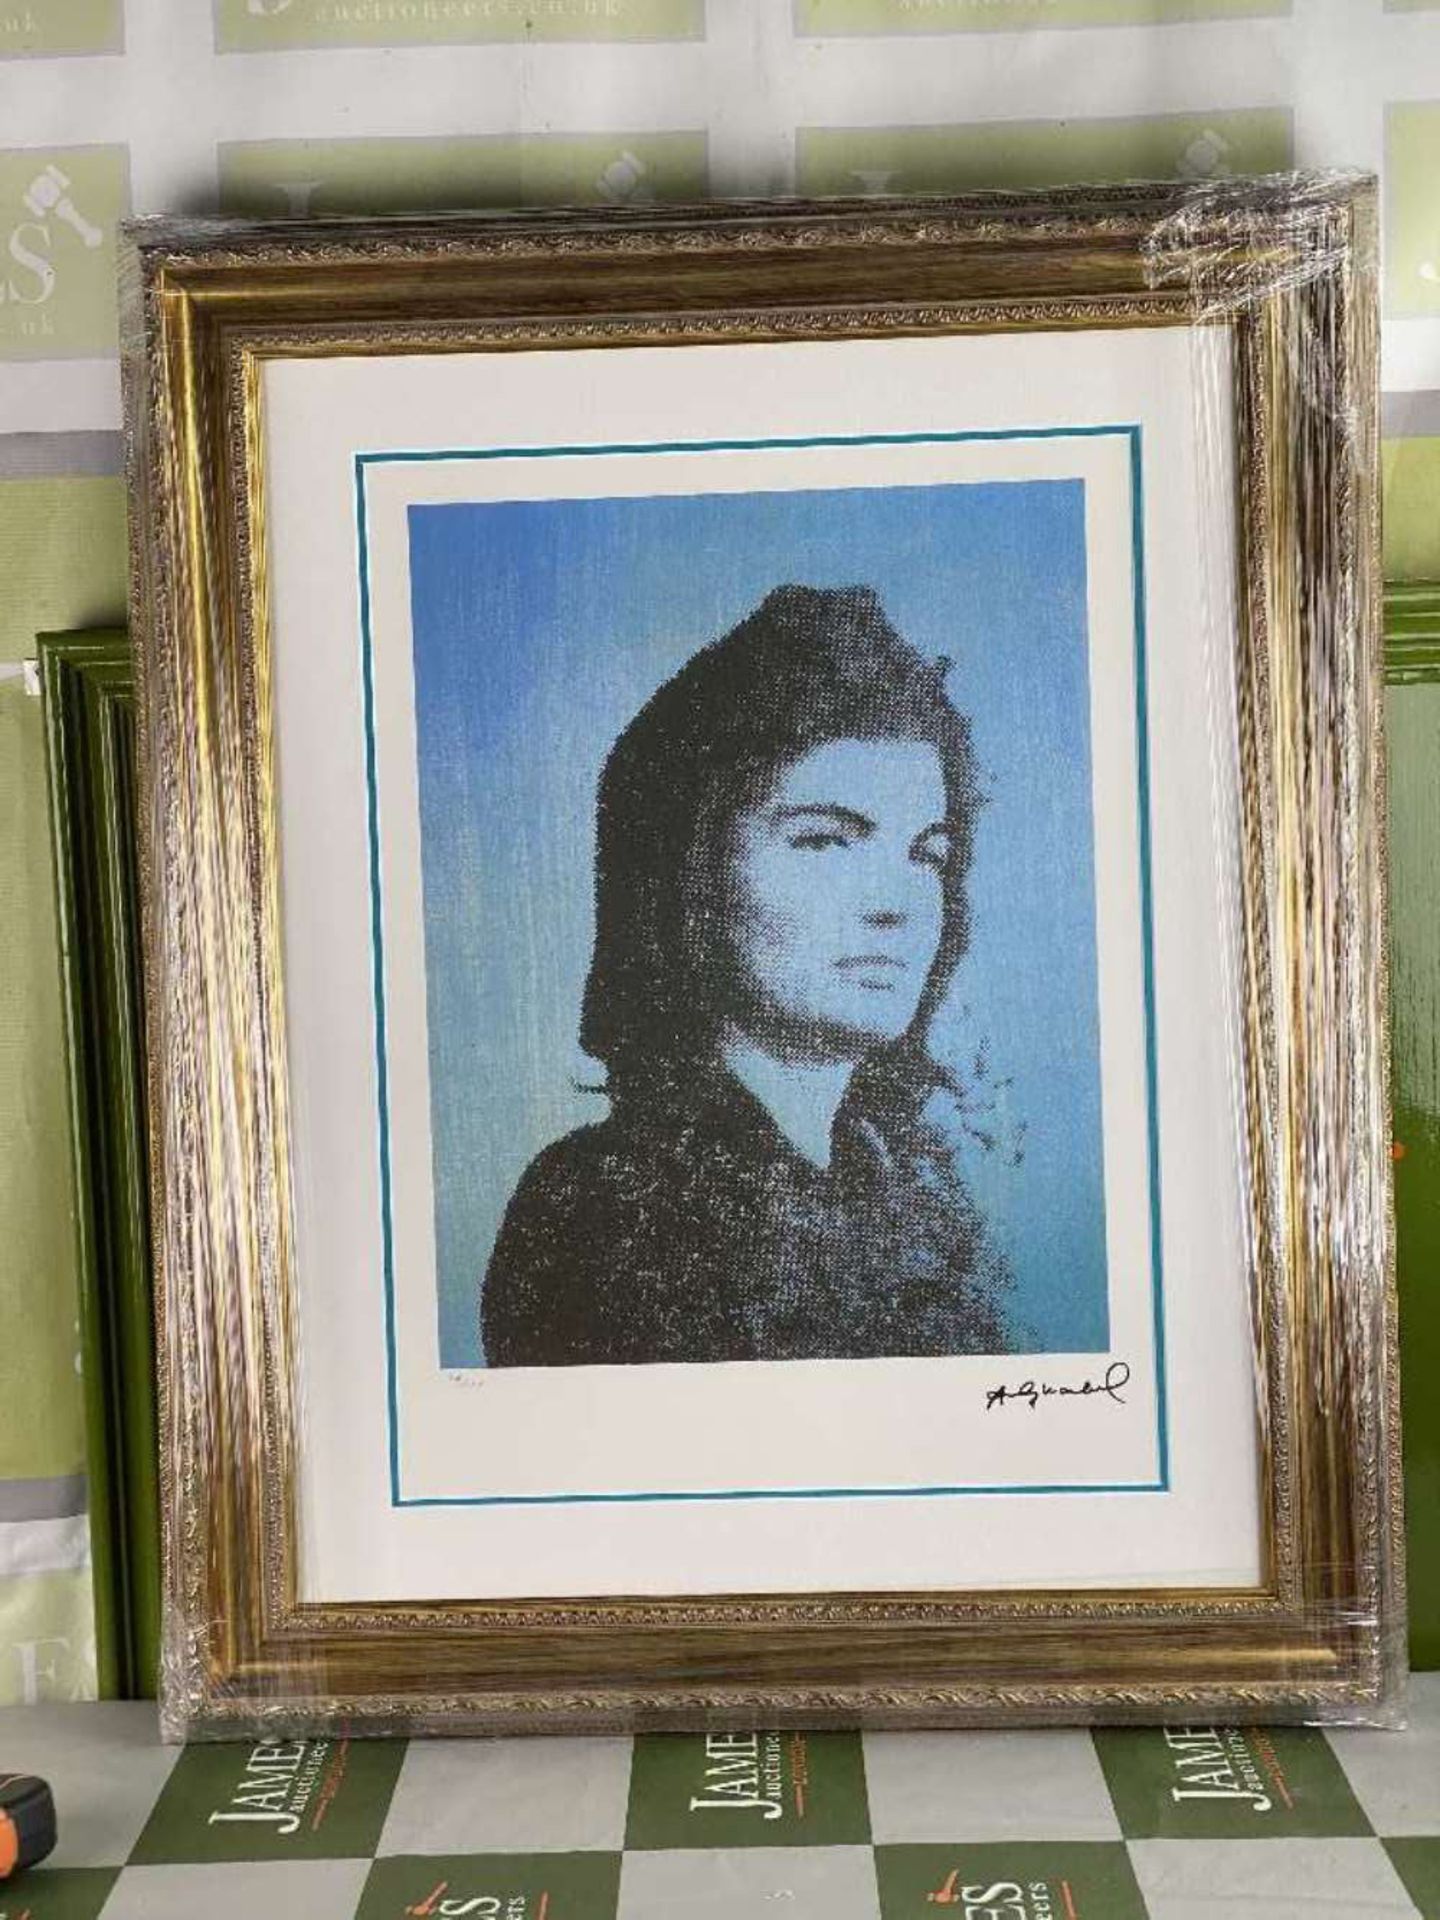 Andy Warhol-(1928-1987) "Jackie O"Castelli NY Original Numbered Lithograph #54/100, Ornate Framed. - Image 7 of 7